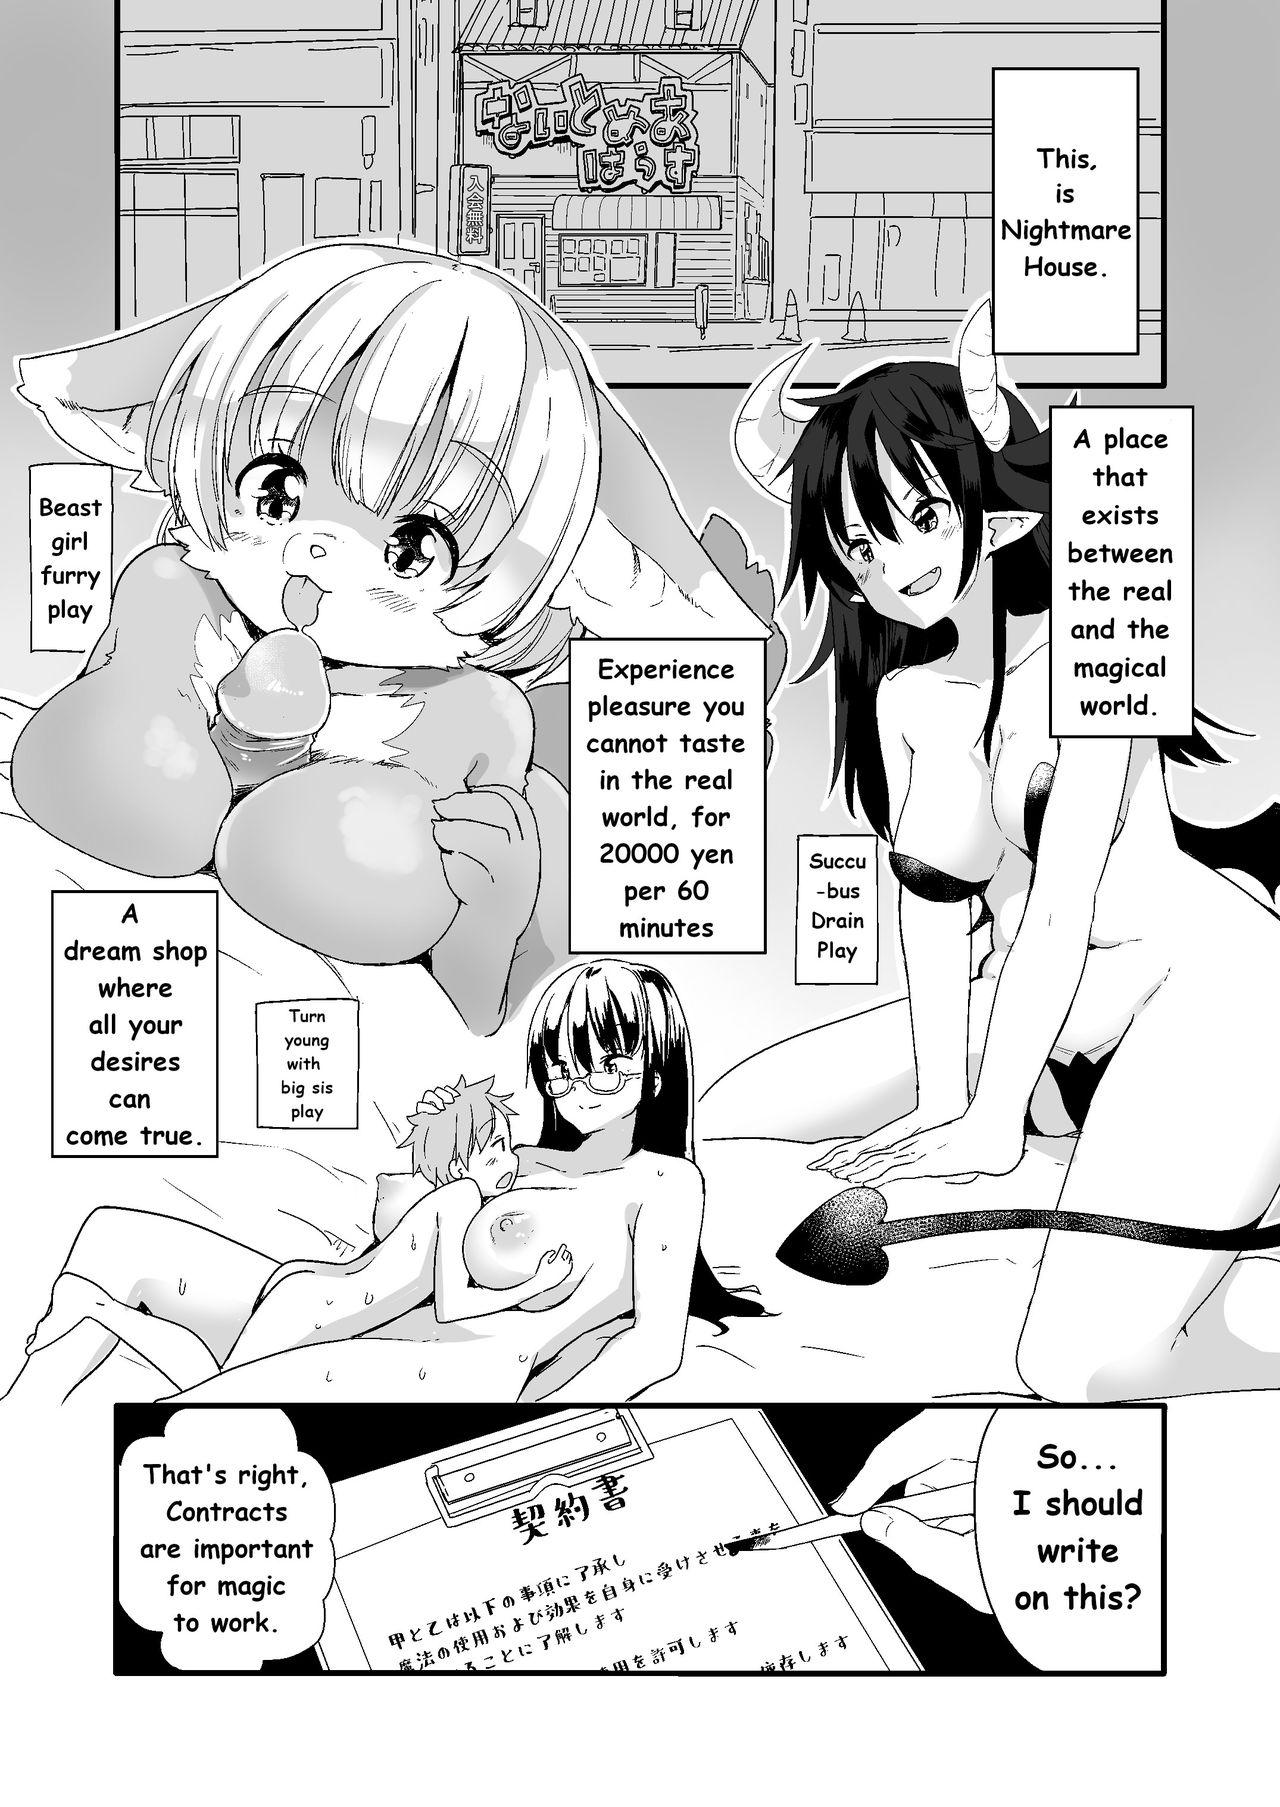 Cum On Ass Nightmare House e Youkoso | Welcome to the Nightmare House - Original Piss - Picture 1